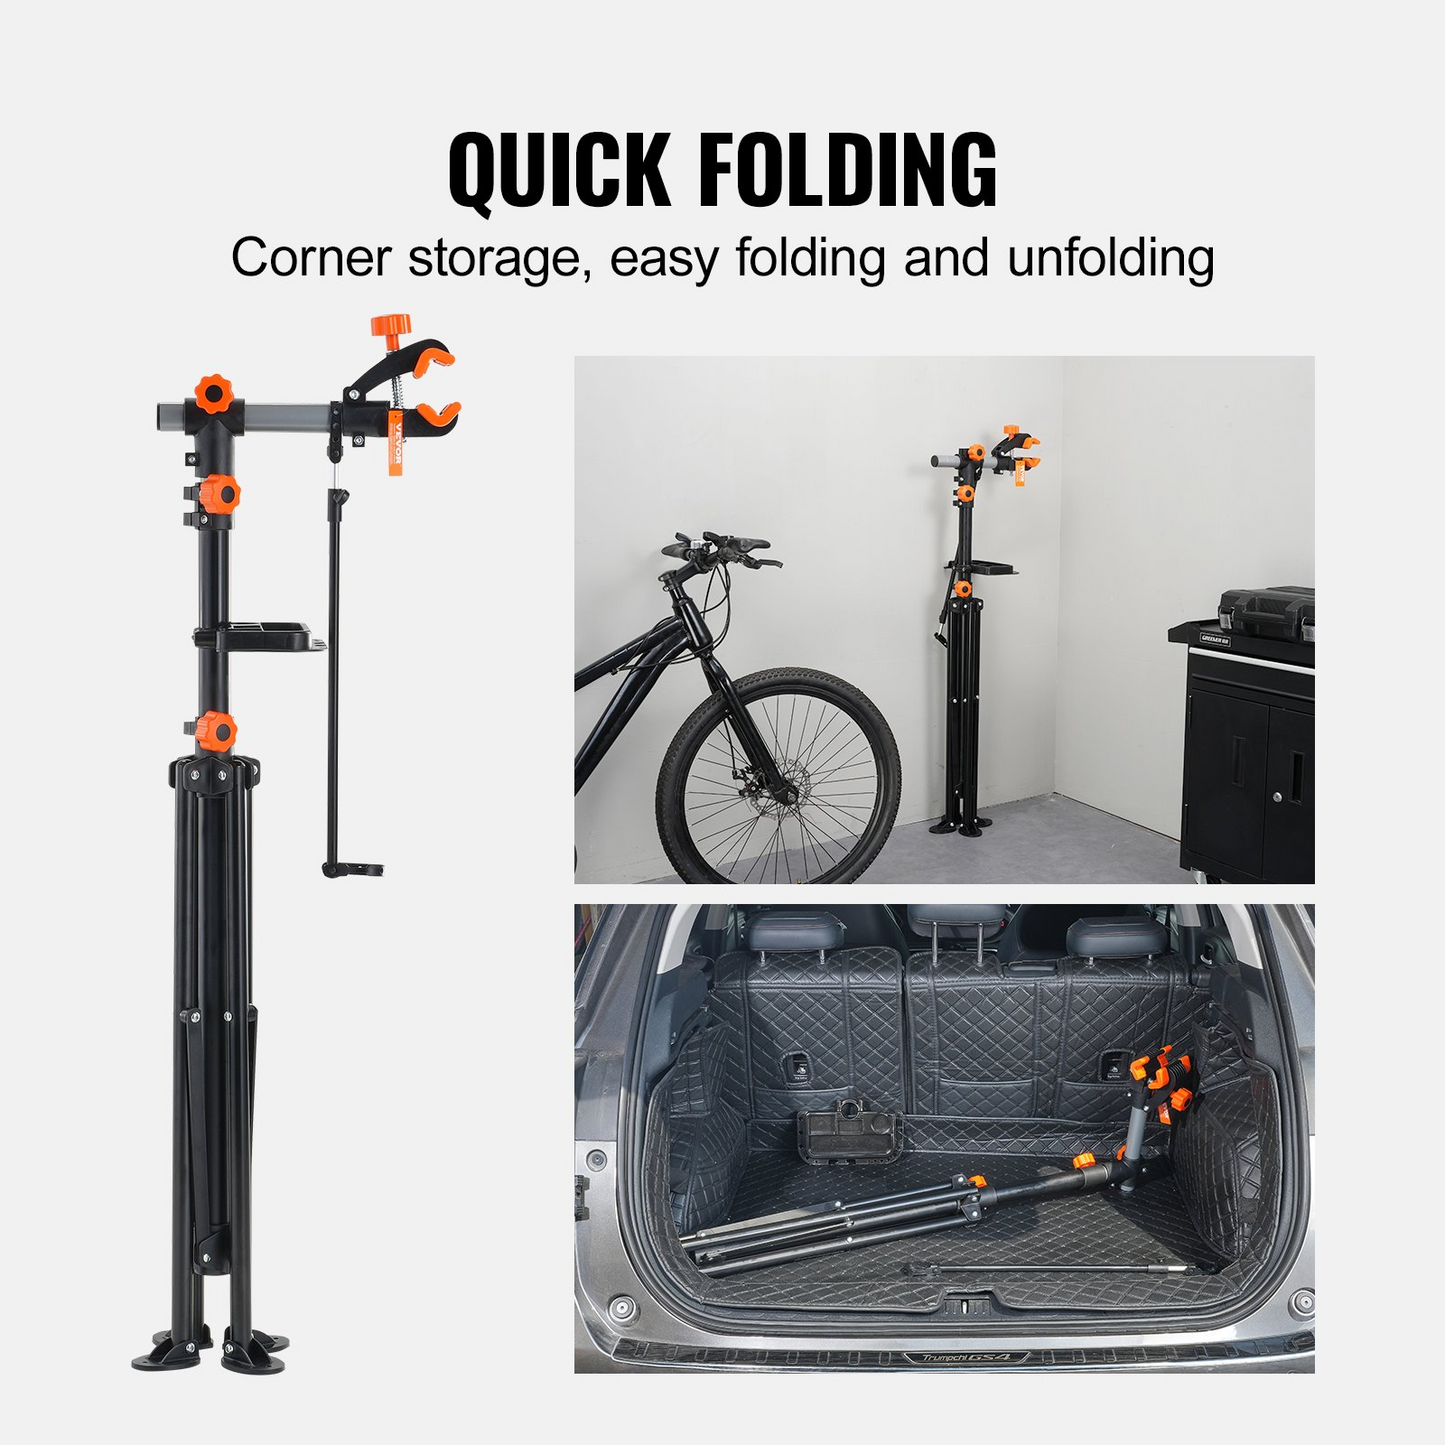 VEVOR Bike Repair Stand, 80 lbs Heavy-duty Steel Bicycle Repair Stand, Adjustable Height Bike Maintenance Workstand with Magnetic Tool Tray Telescopic Arm, Foldable Bike Work Stand for Home, Shops, Goodies N Stuff